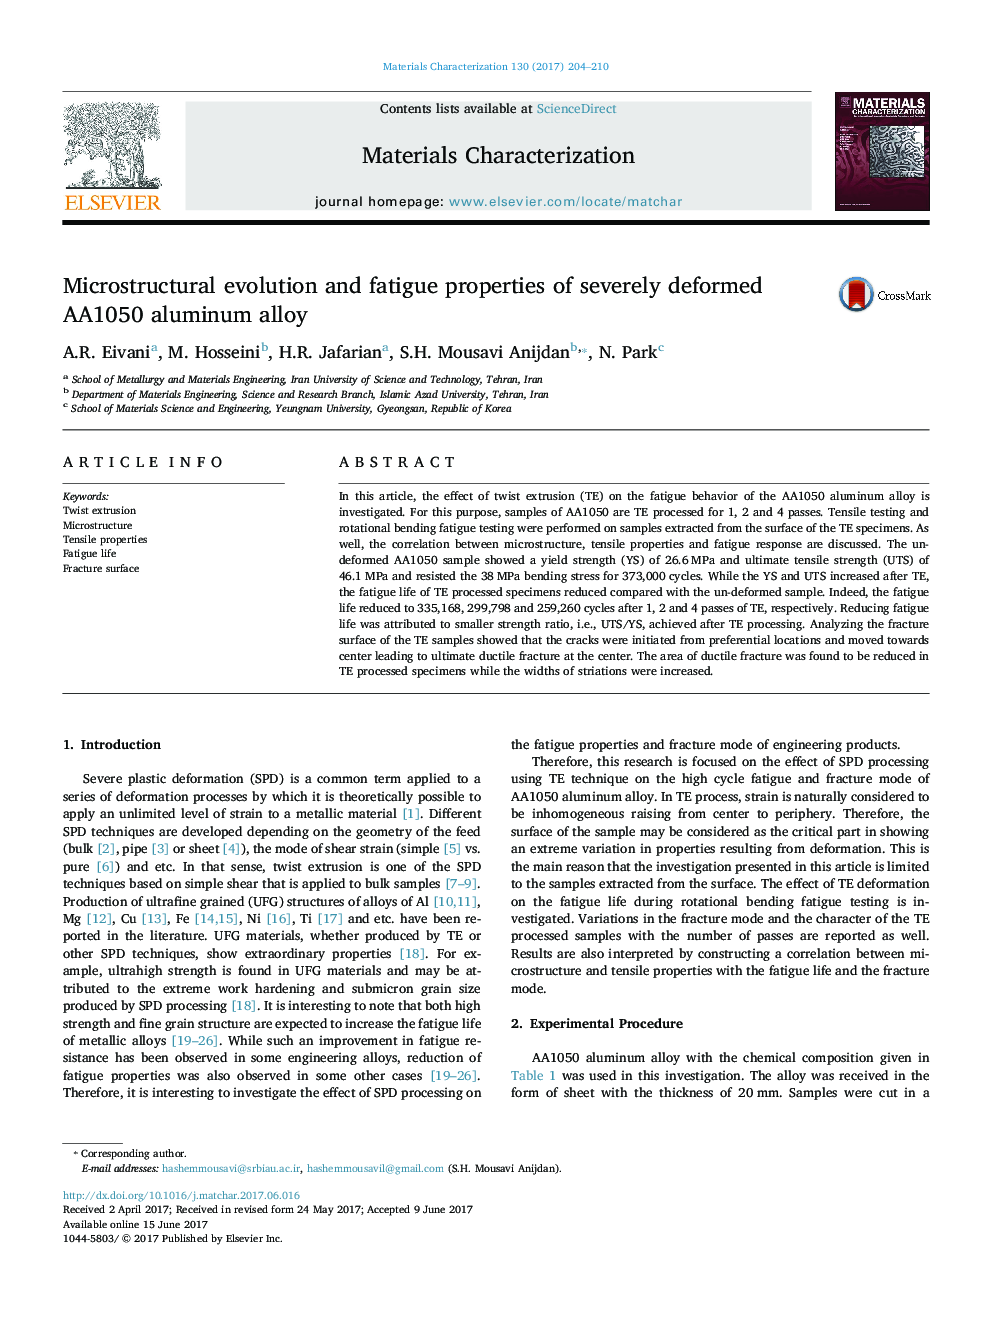 Microstructural evolution and fatigue properties of severely deformed AA1050 aluminum alloy